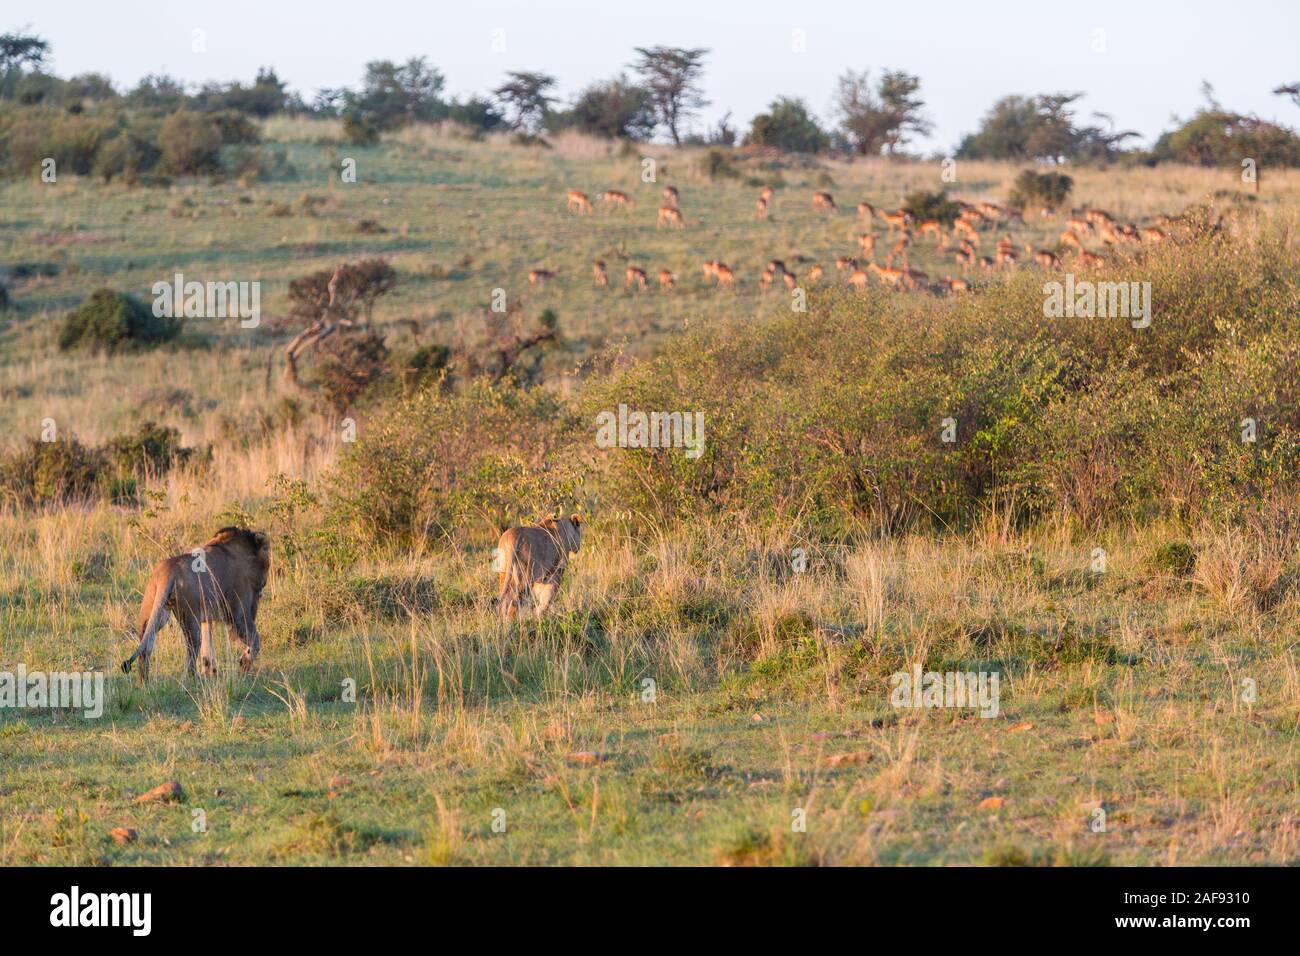 Tanzania. Serengeti. Male and Female Lion Walking Stealthily toward a Herd of Impalas, Early Morning. Stock Photo